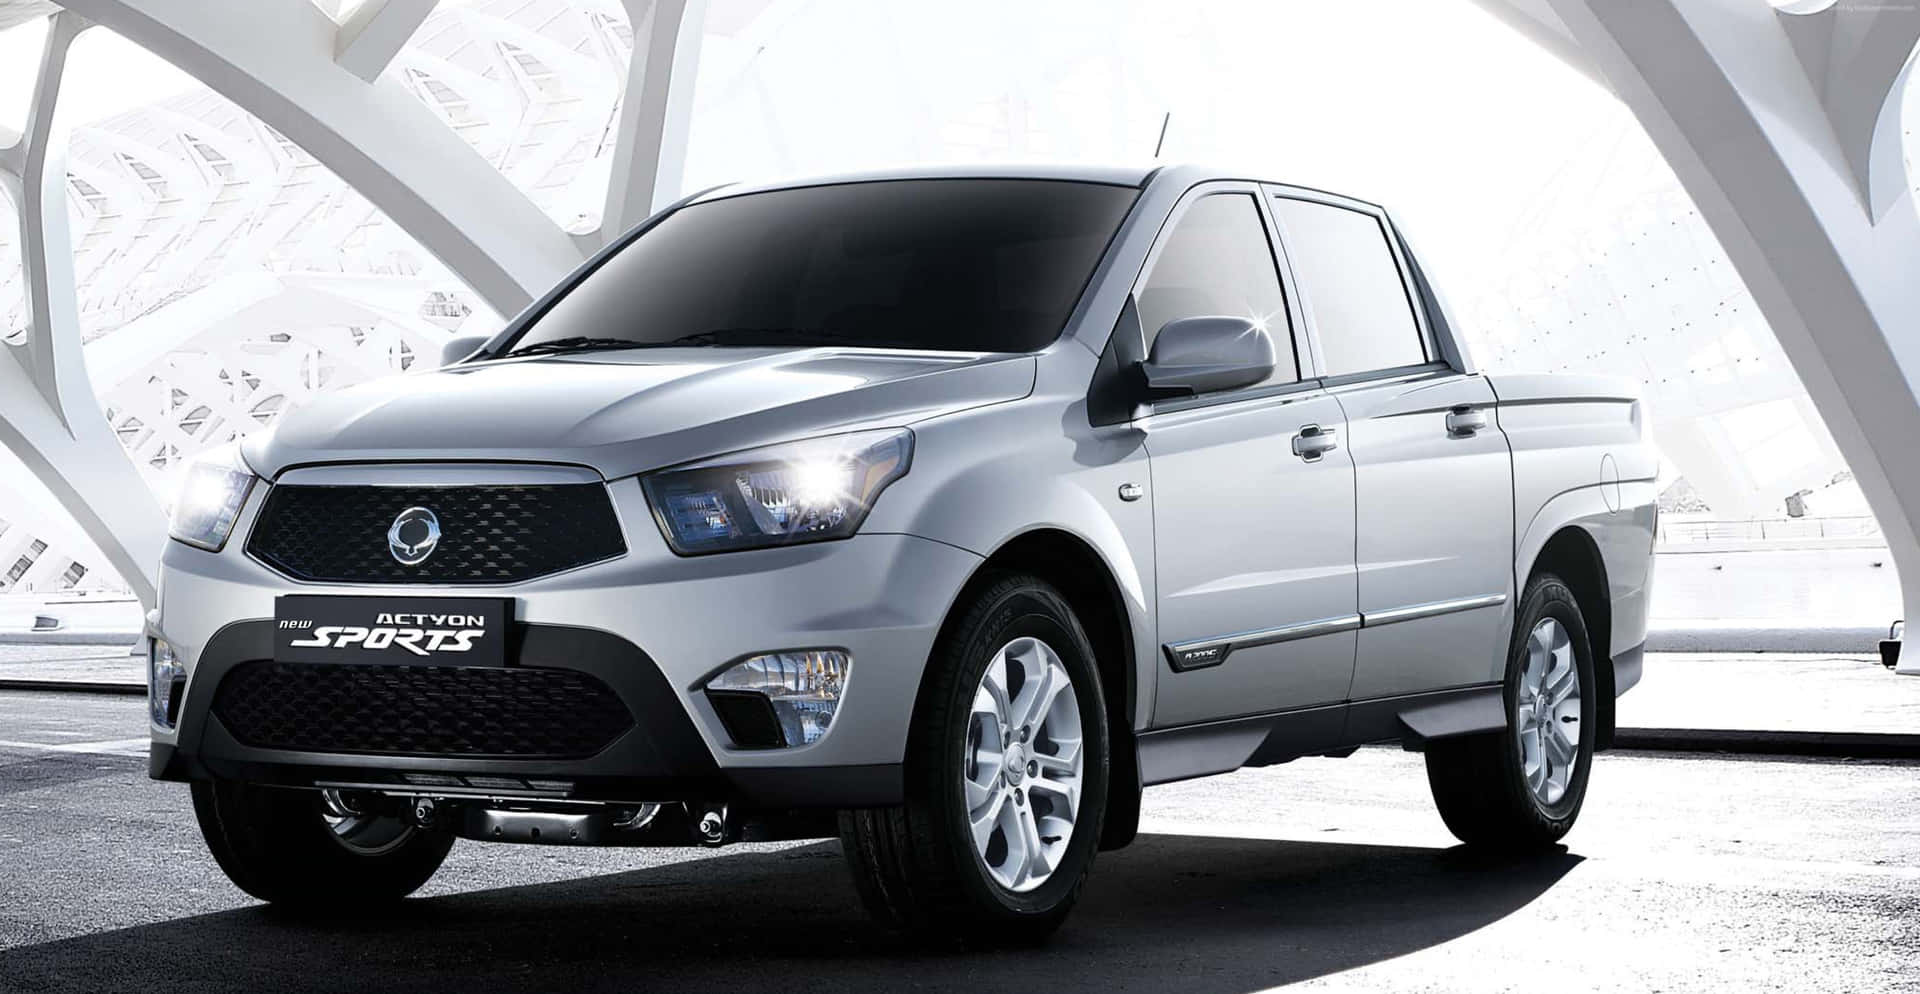 Ssangyong Concept Car on Display Wallpaper